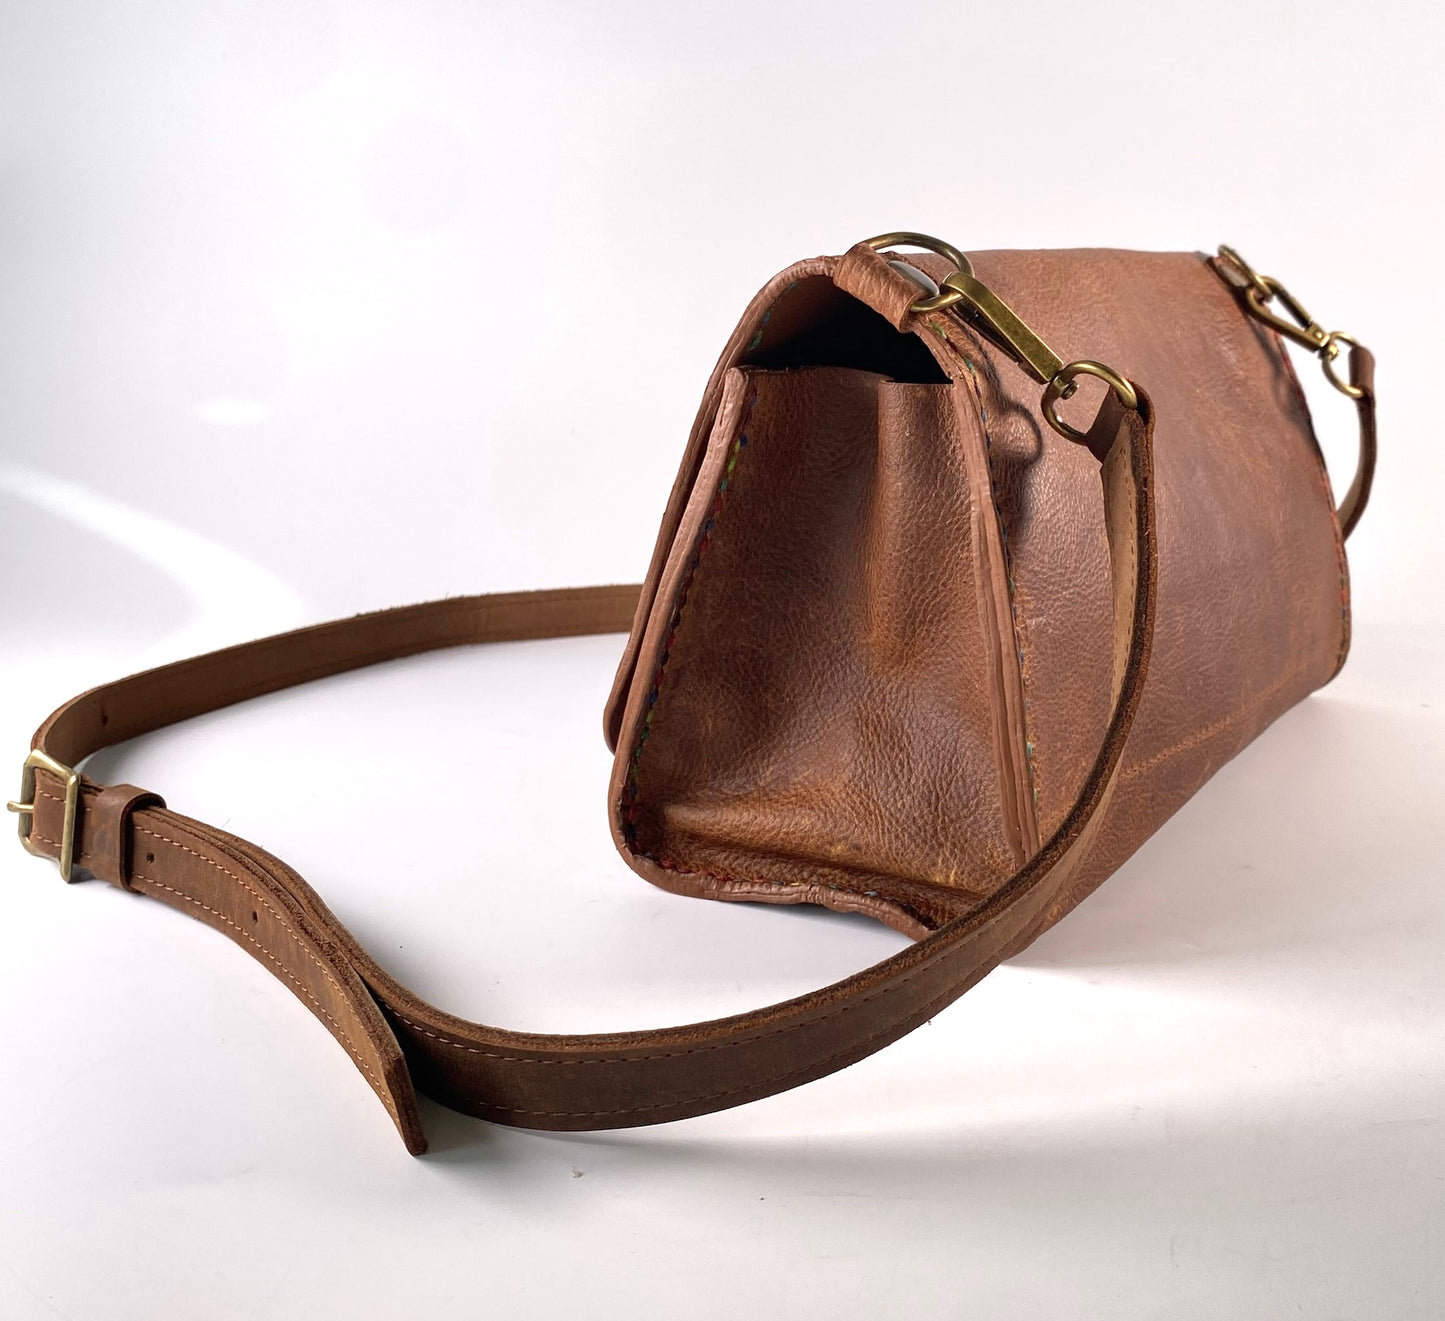 Oiled Leather Crossbody Bag - dark tan, hand-stitched